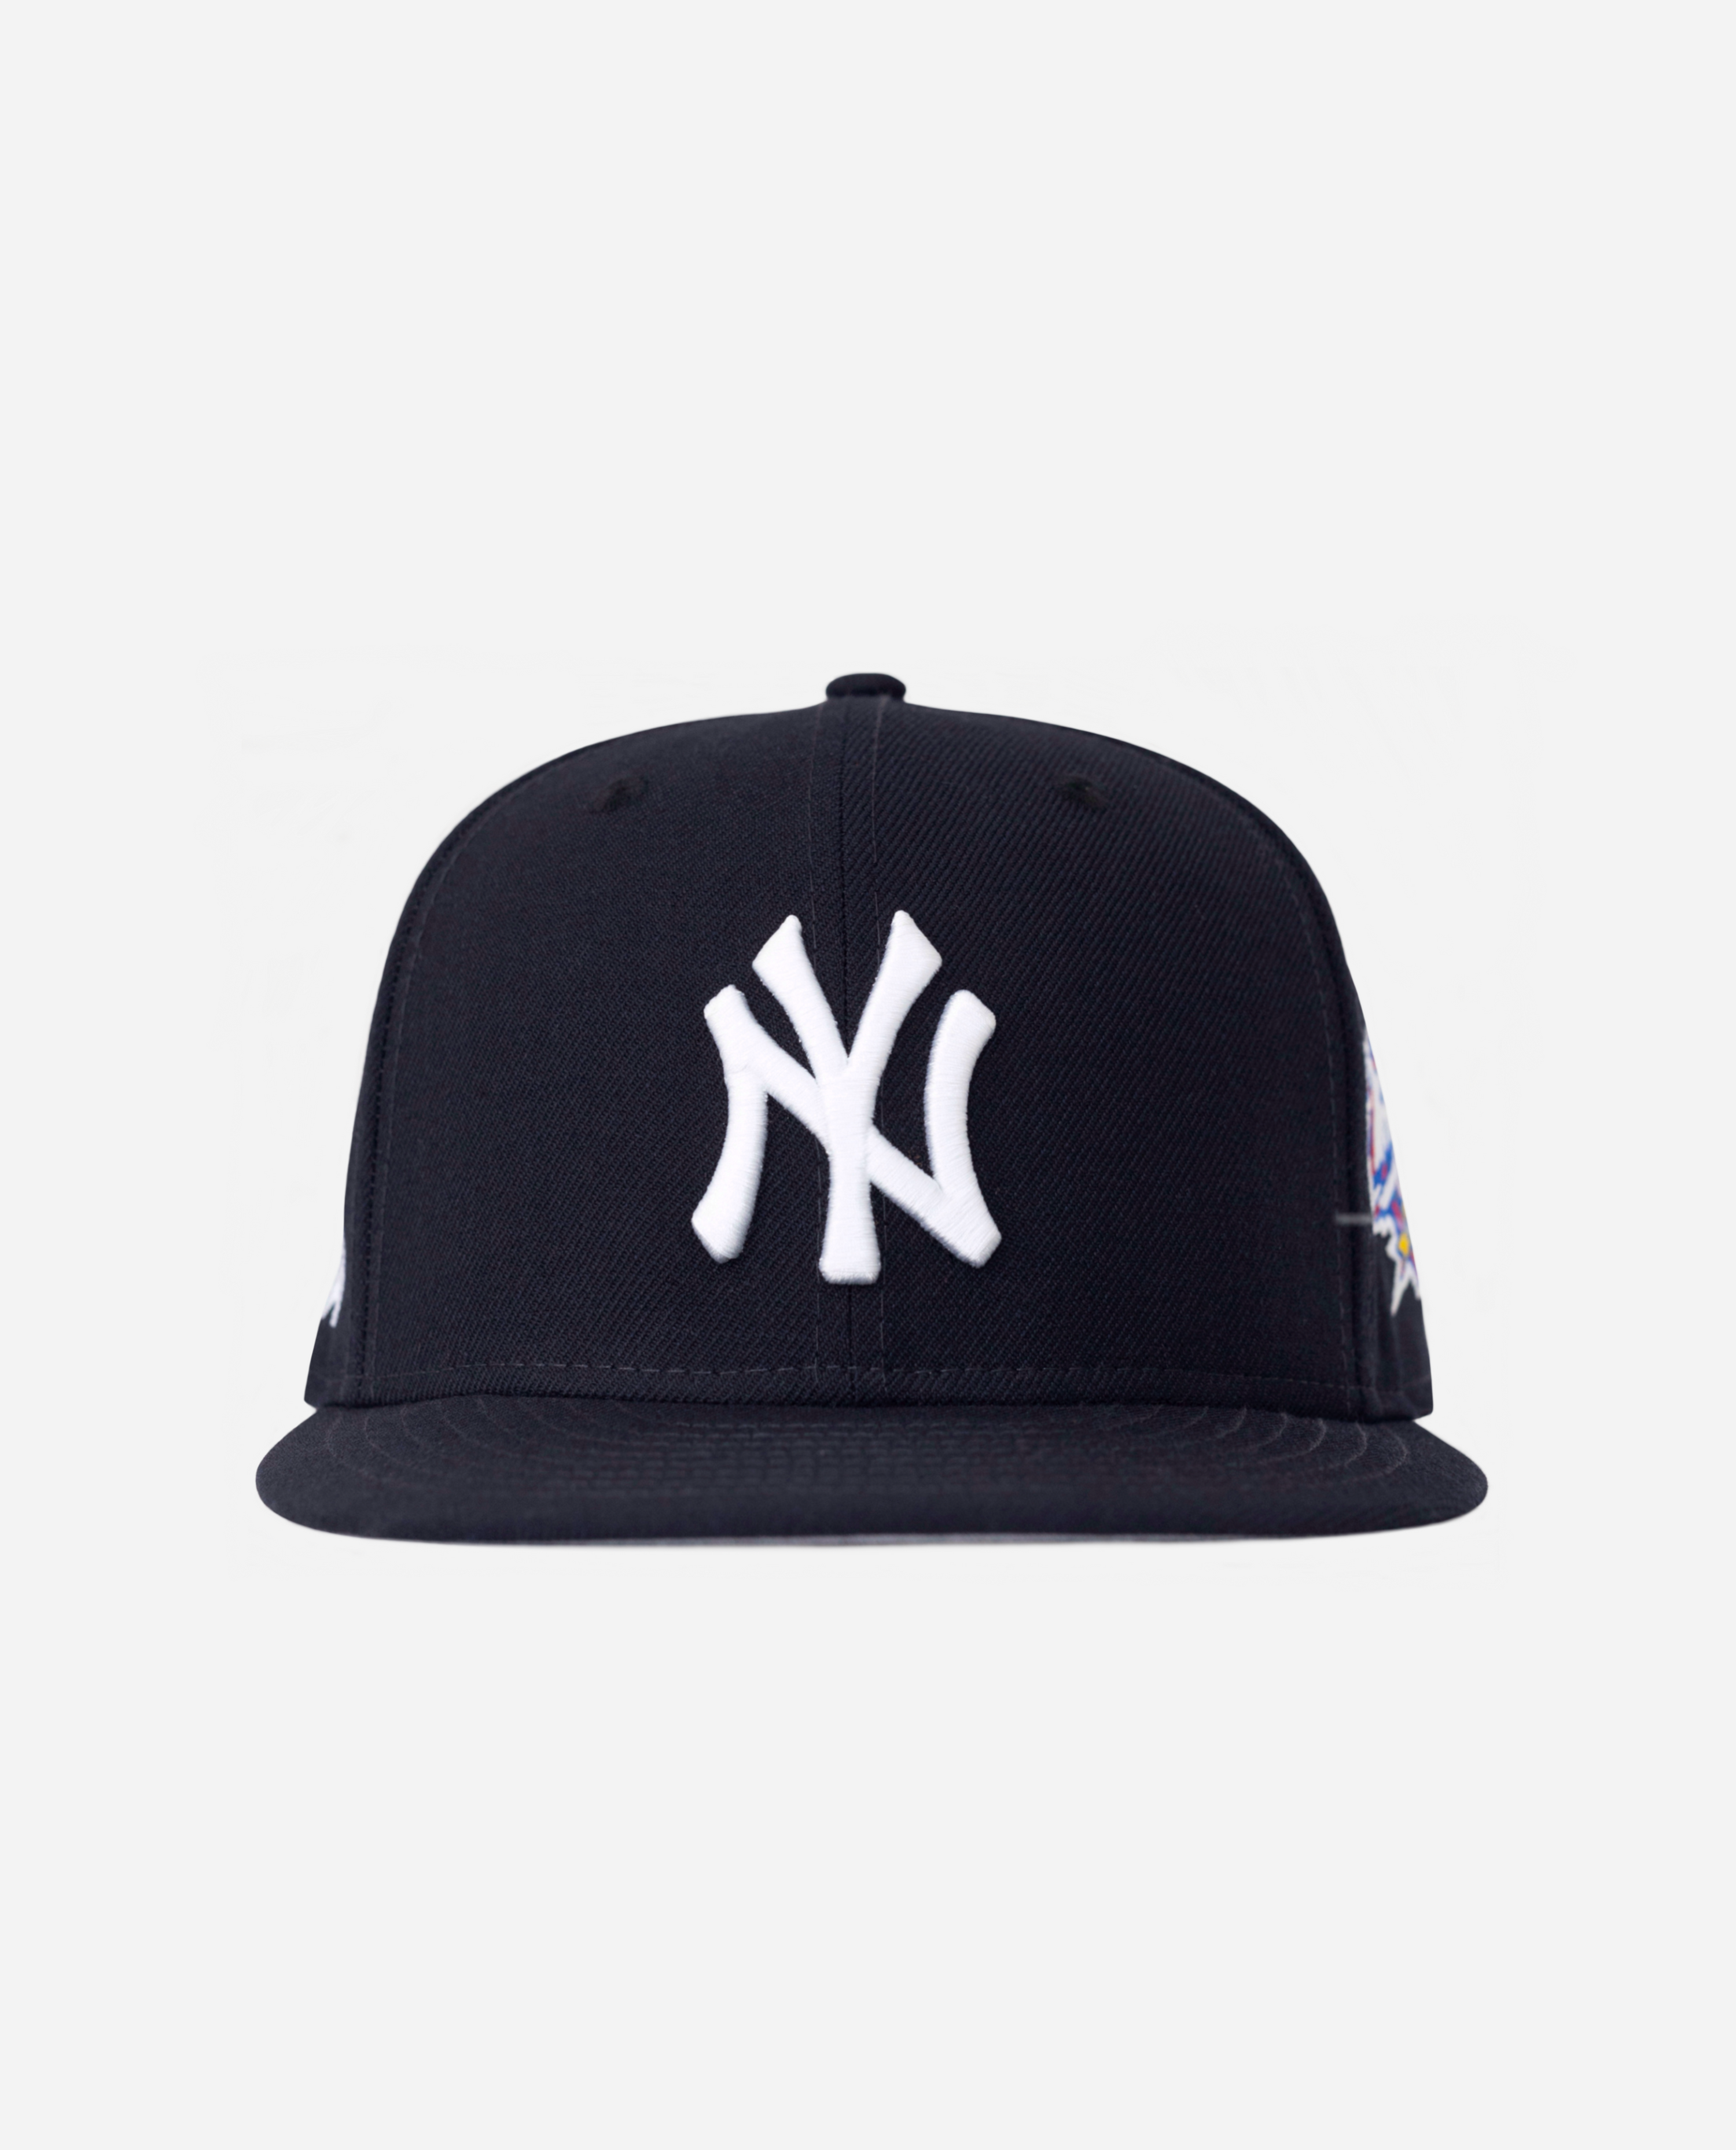 oMA NEW YORK 1998 WORLD SERIES FITTED HAT NAVY / WHITE